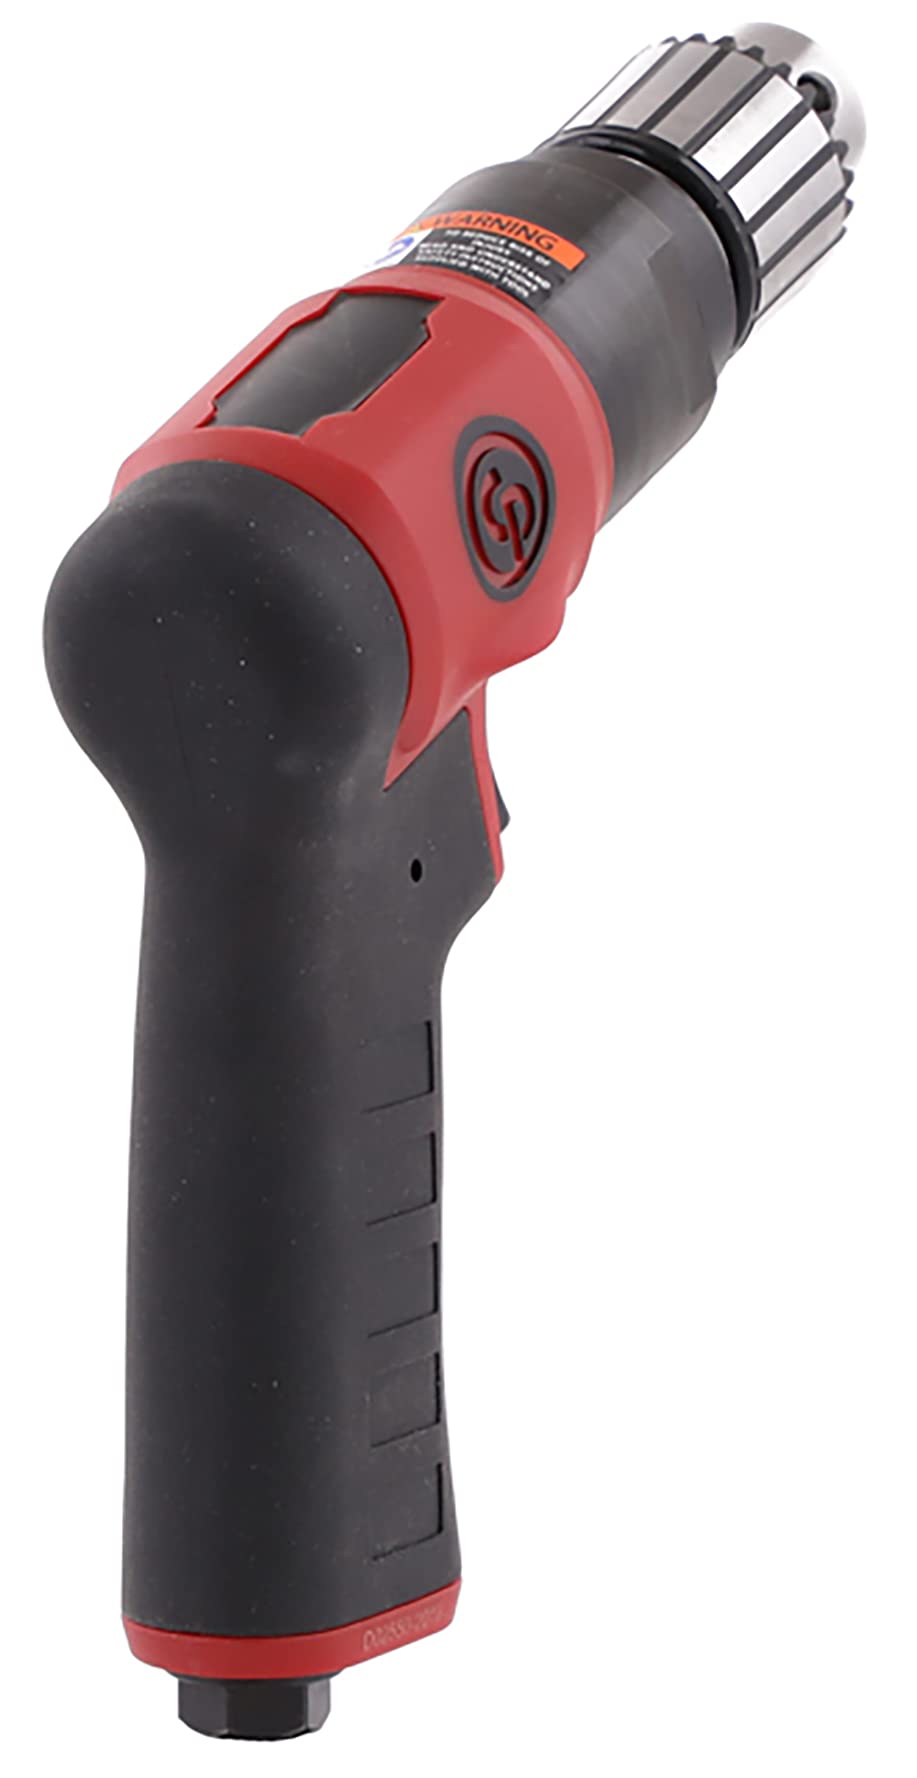 Chicago Pneumatic CP9285C - Air Power Drill, Hand Drill, Power Tools & Home Improvement, 3/8 Inch (10 mm), Keyed Chuck, Pistol Handle, 0.62 HP / 460 W, Stall Torque 4.1 ft. lbf / 5.5 Nm - 3000 RPM